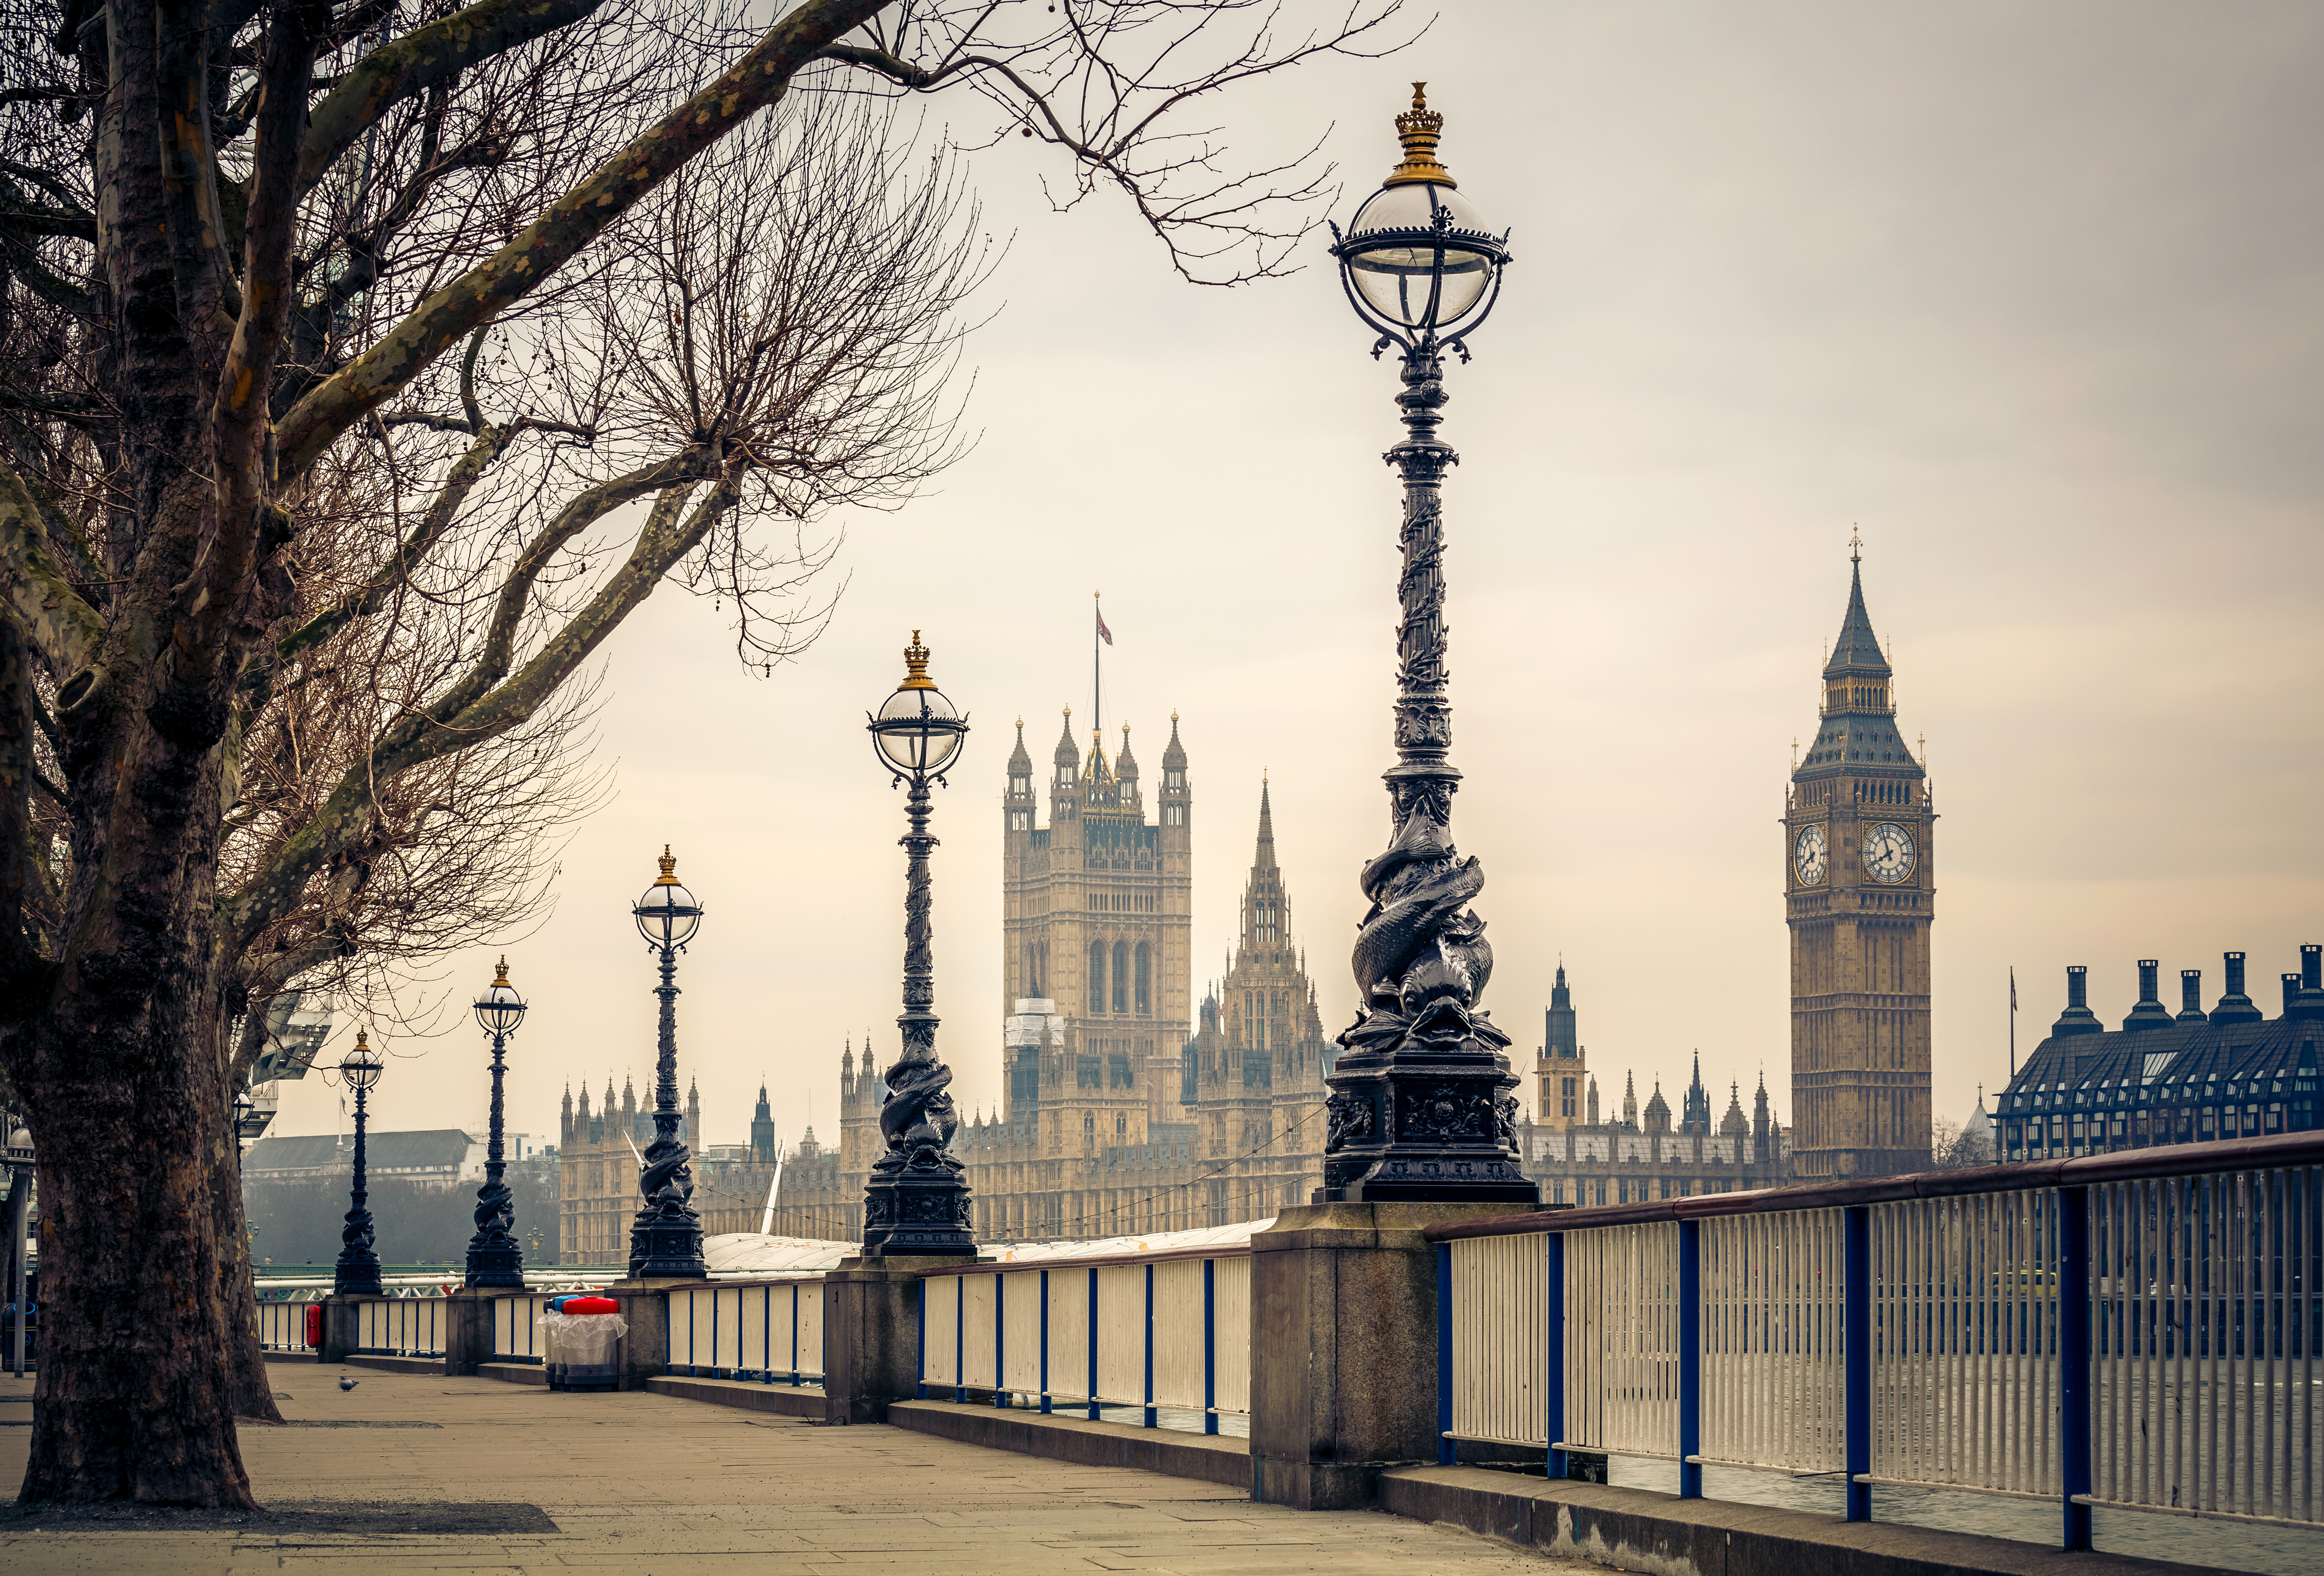 Palace Of Westminster 4k Ultra HD Wallpaper